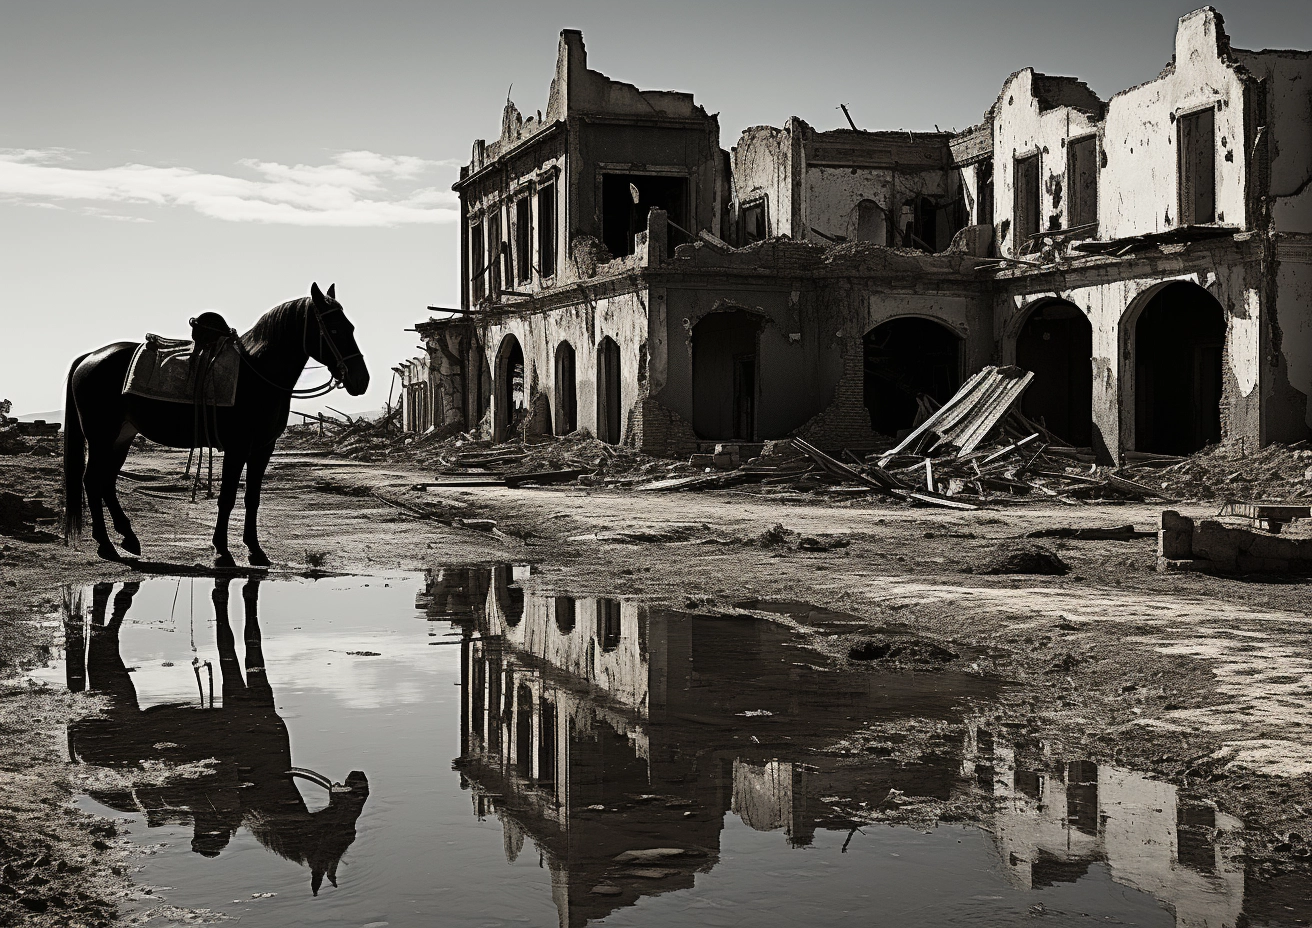 An image of a horse in an old forgotten city